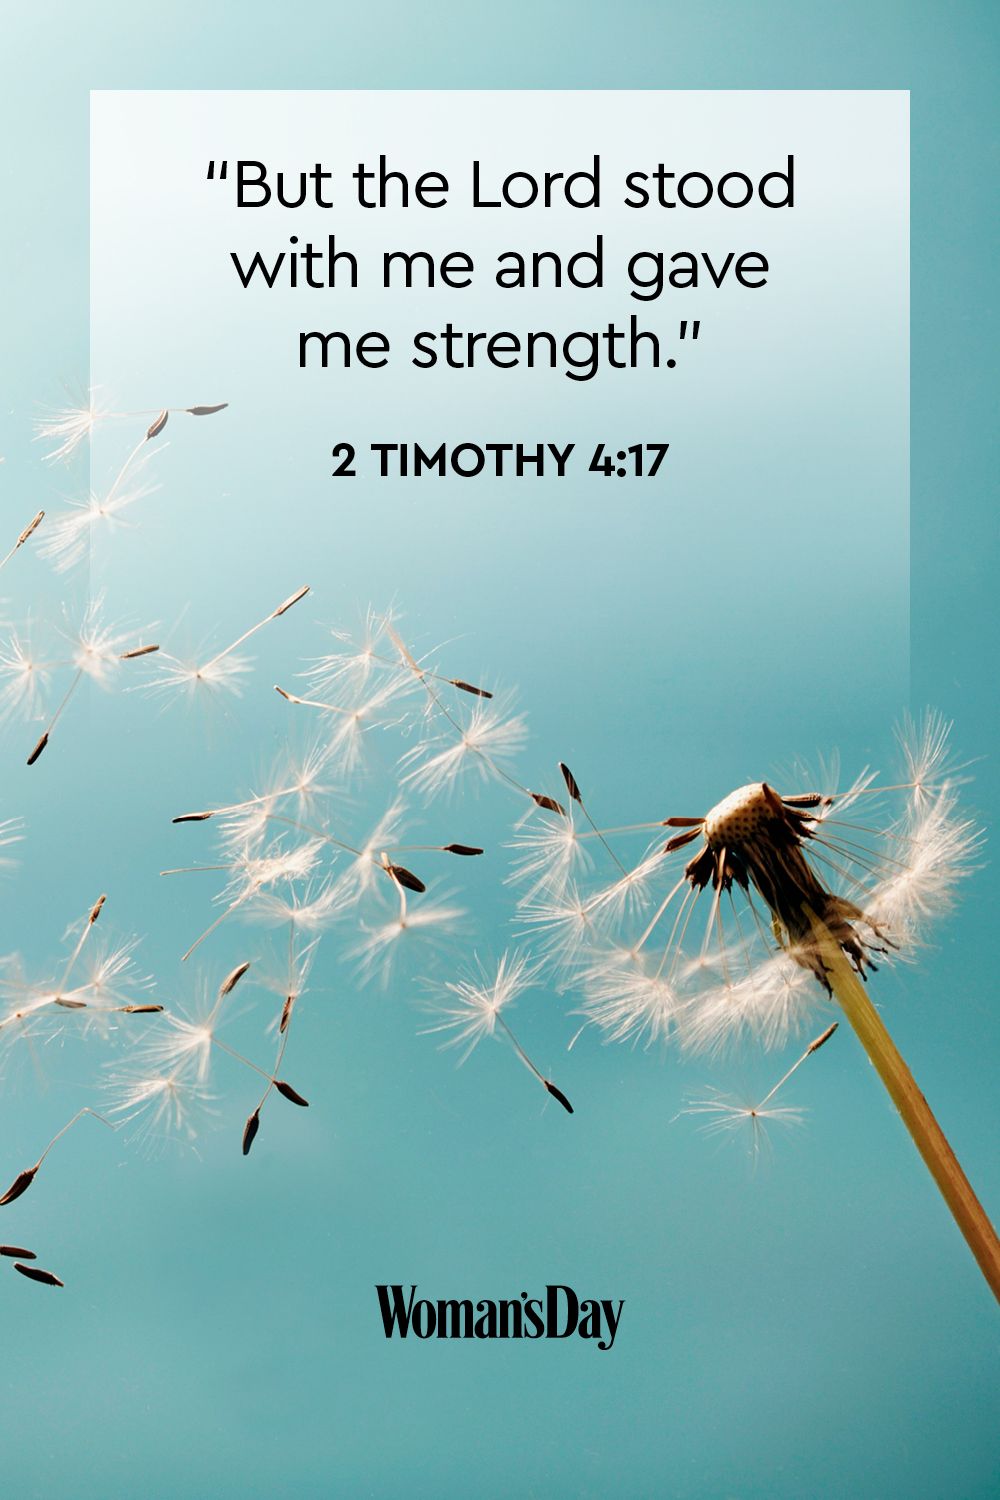 40 Bible Quotes - Bible Scripture Verses of the Day